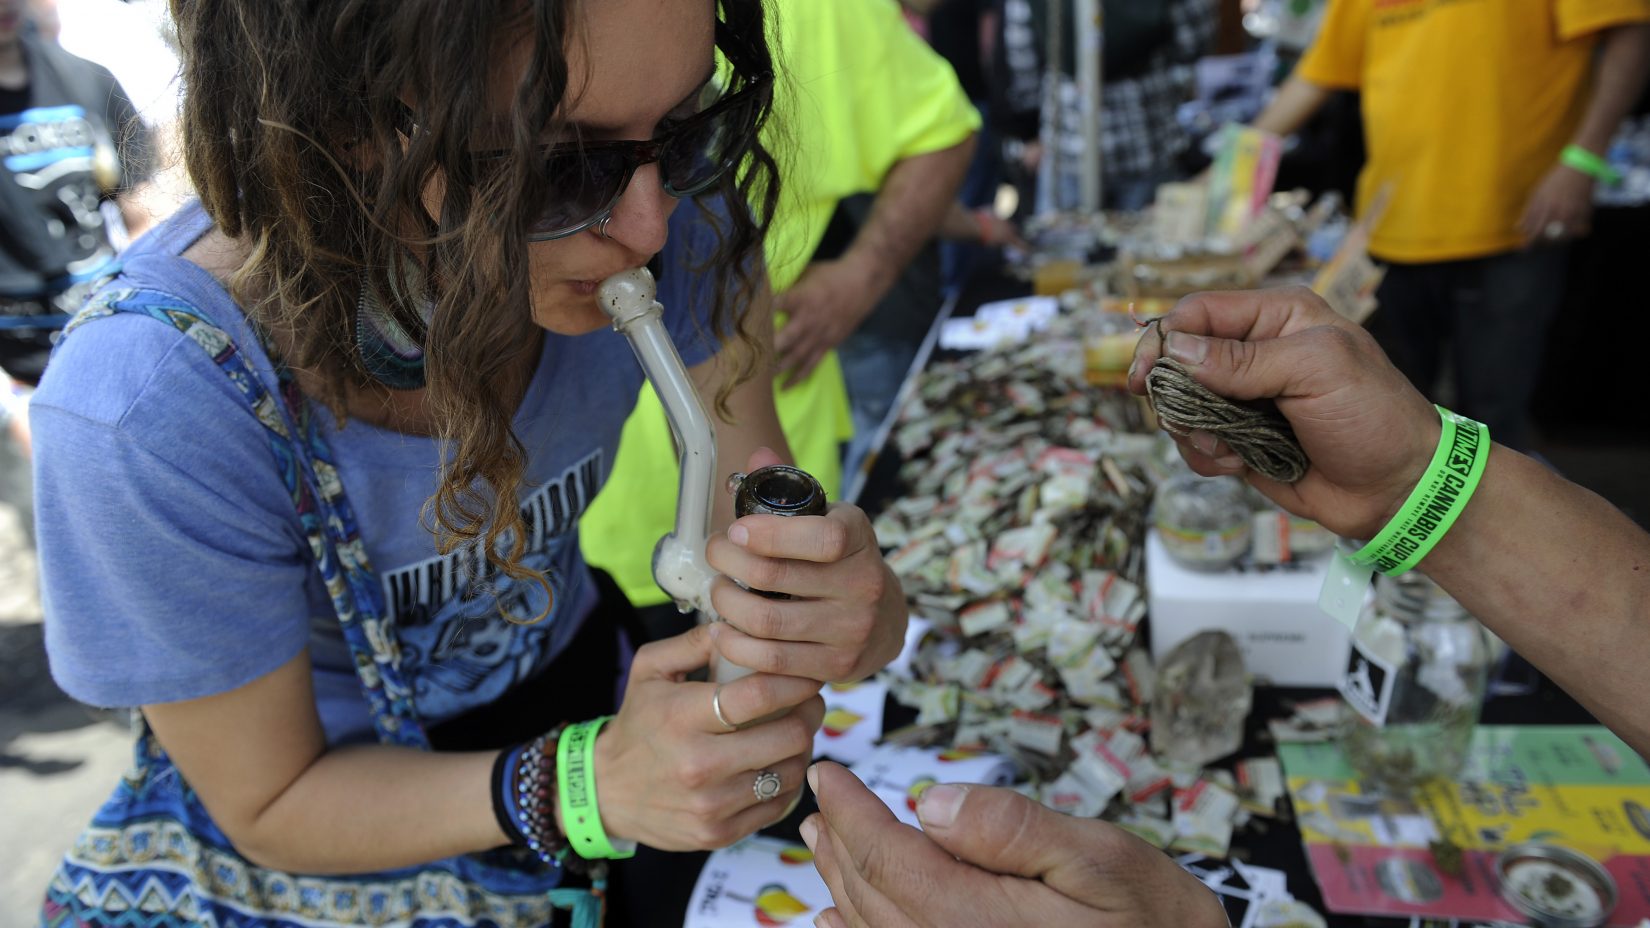 Video: High Times' editor hints that some will still sample at Cannabis Cup